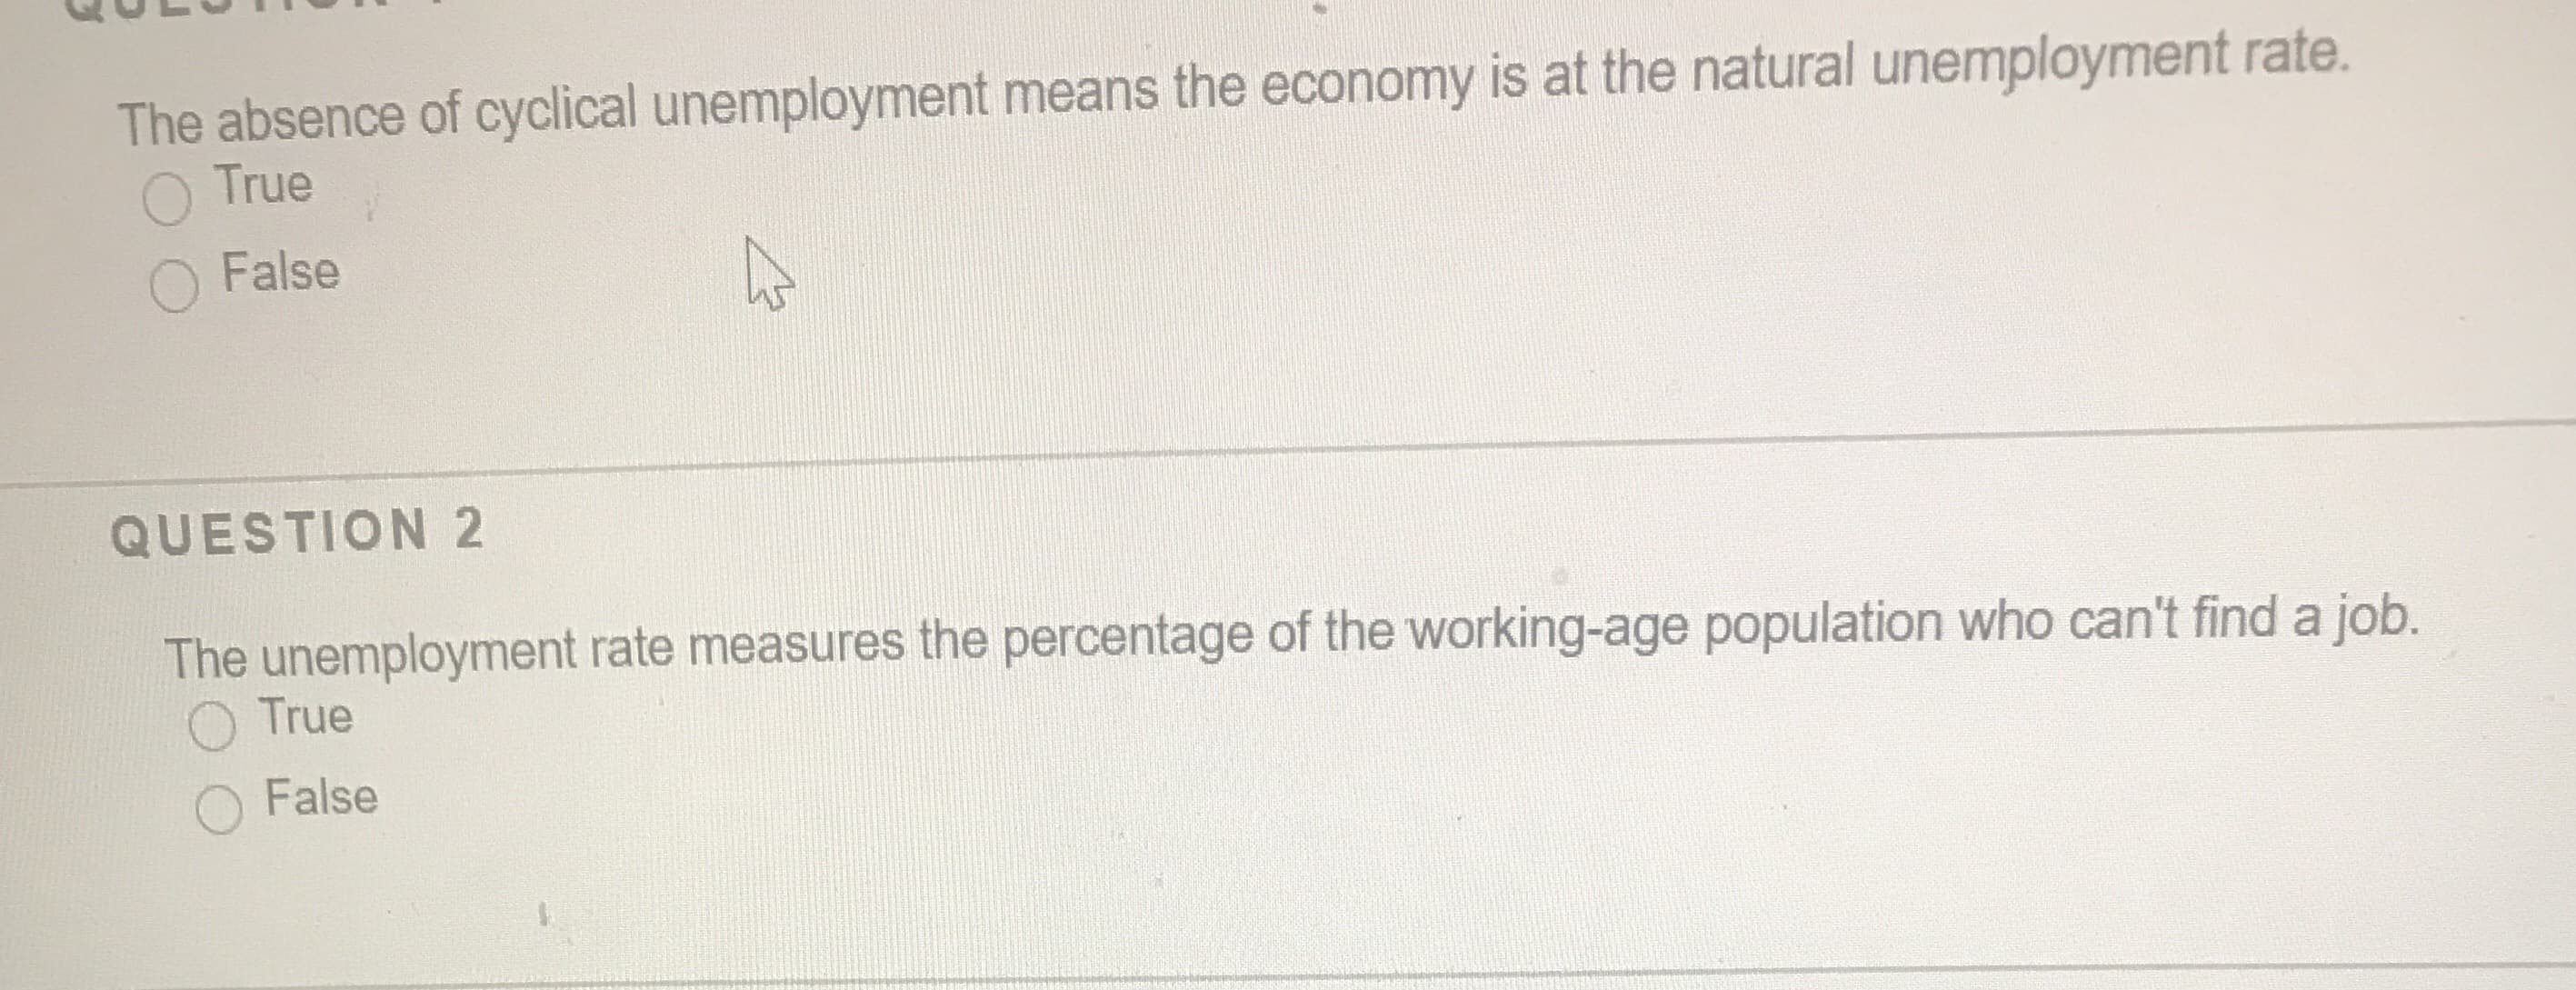 The absence of cyclical unemployment means the economy is at the natural unemployment rate.
O True
False
QUESTION 2
The unemployment rate measures the percentage of the working-age population who can't find a job.
O True
False
